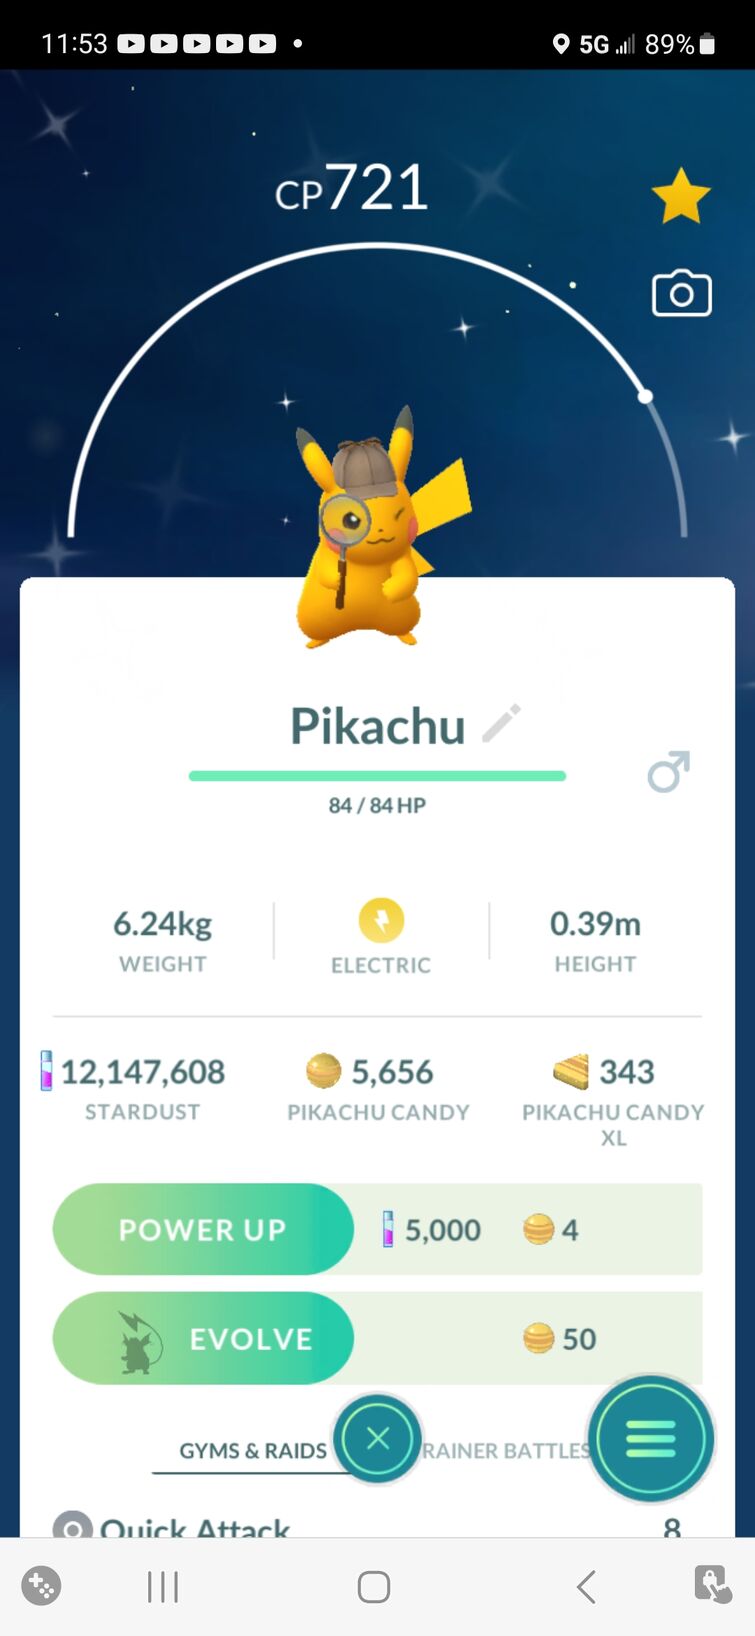 How to get Shiny Detective Hat Pikachu in Pokemon GO